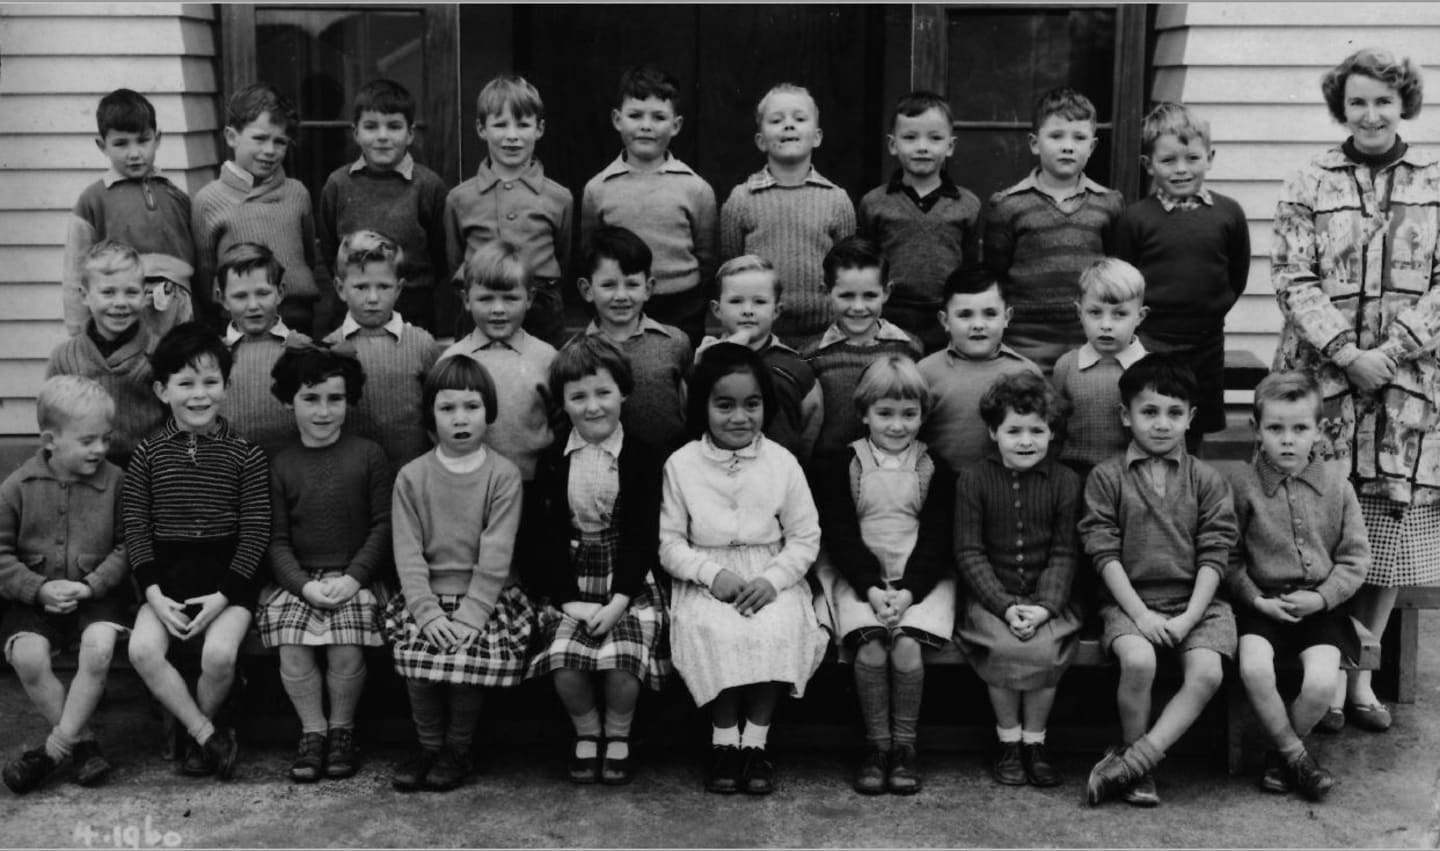 Ron Mark School Photo 1960 (Front Row, 2nd from the right)